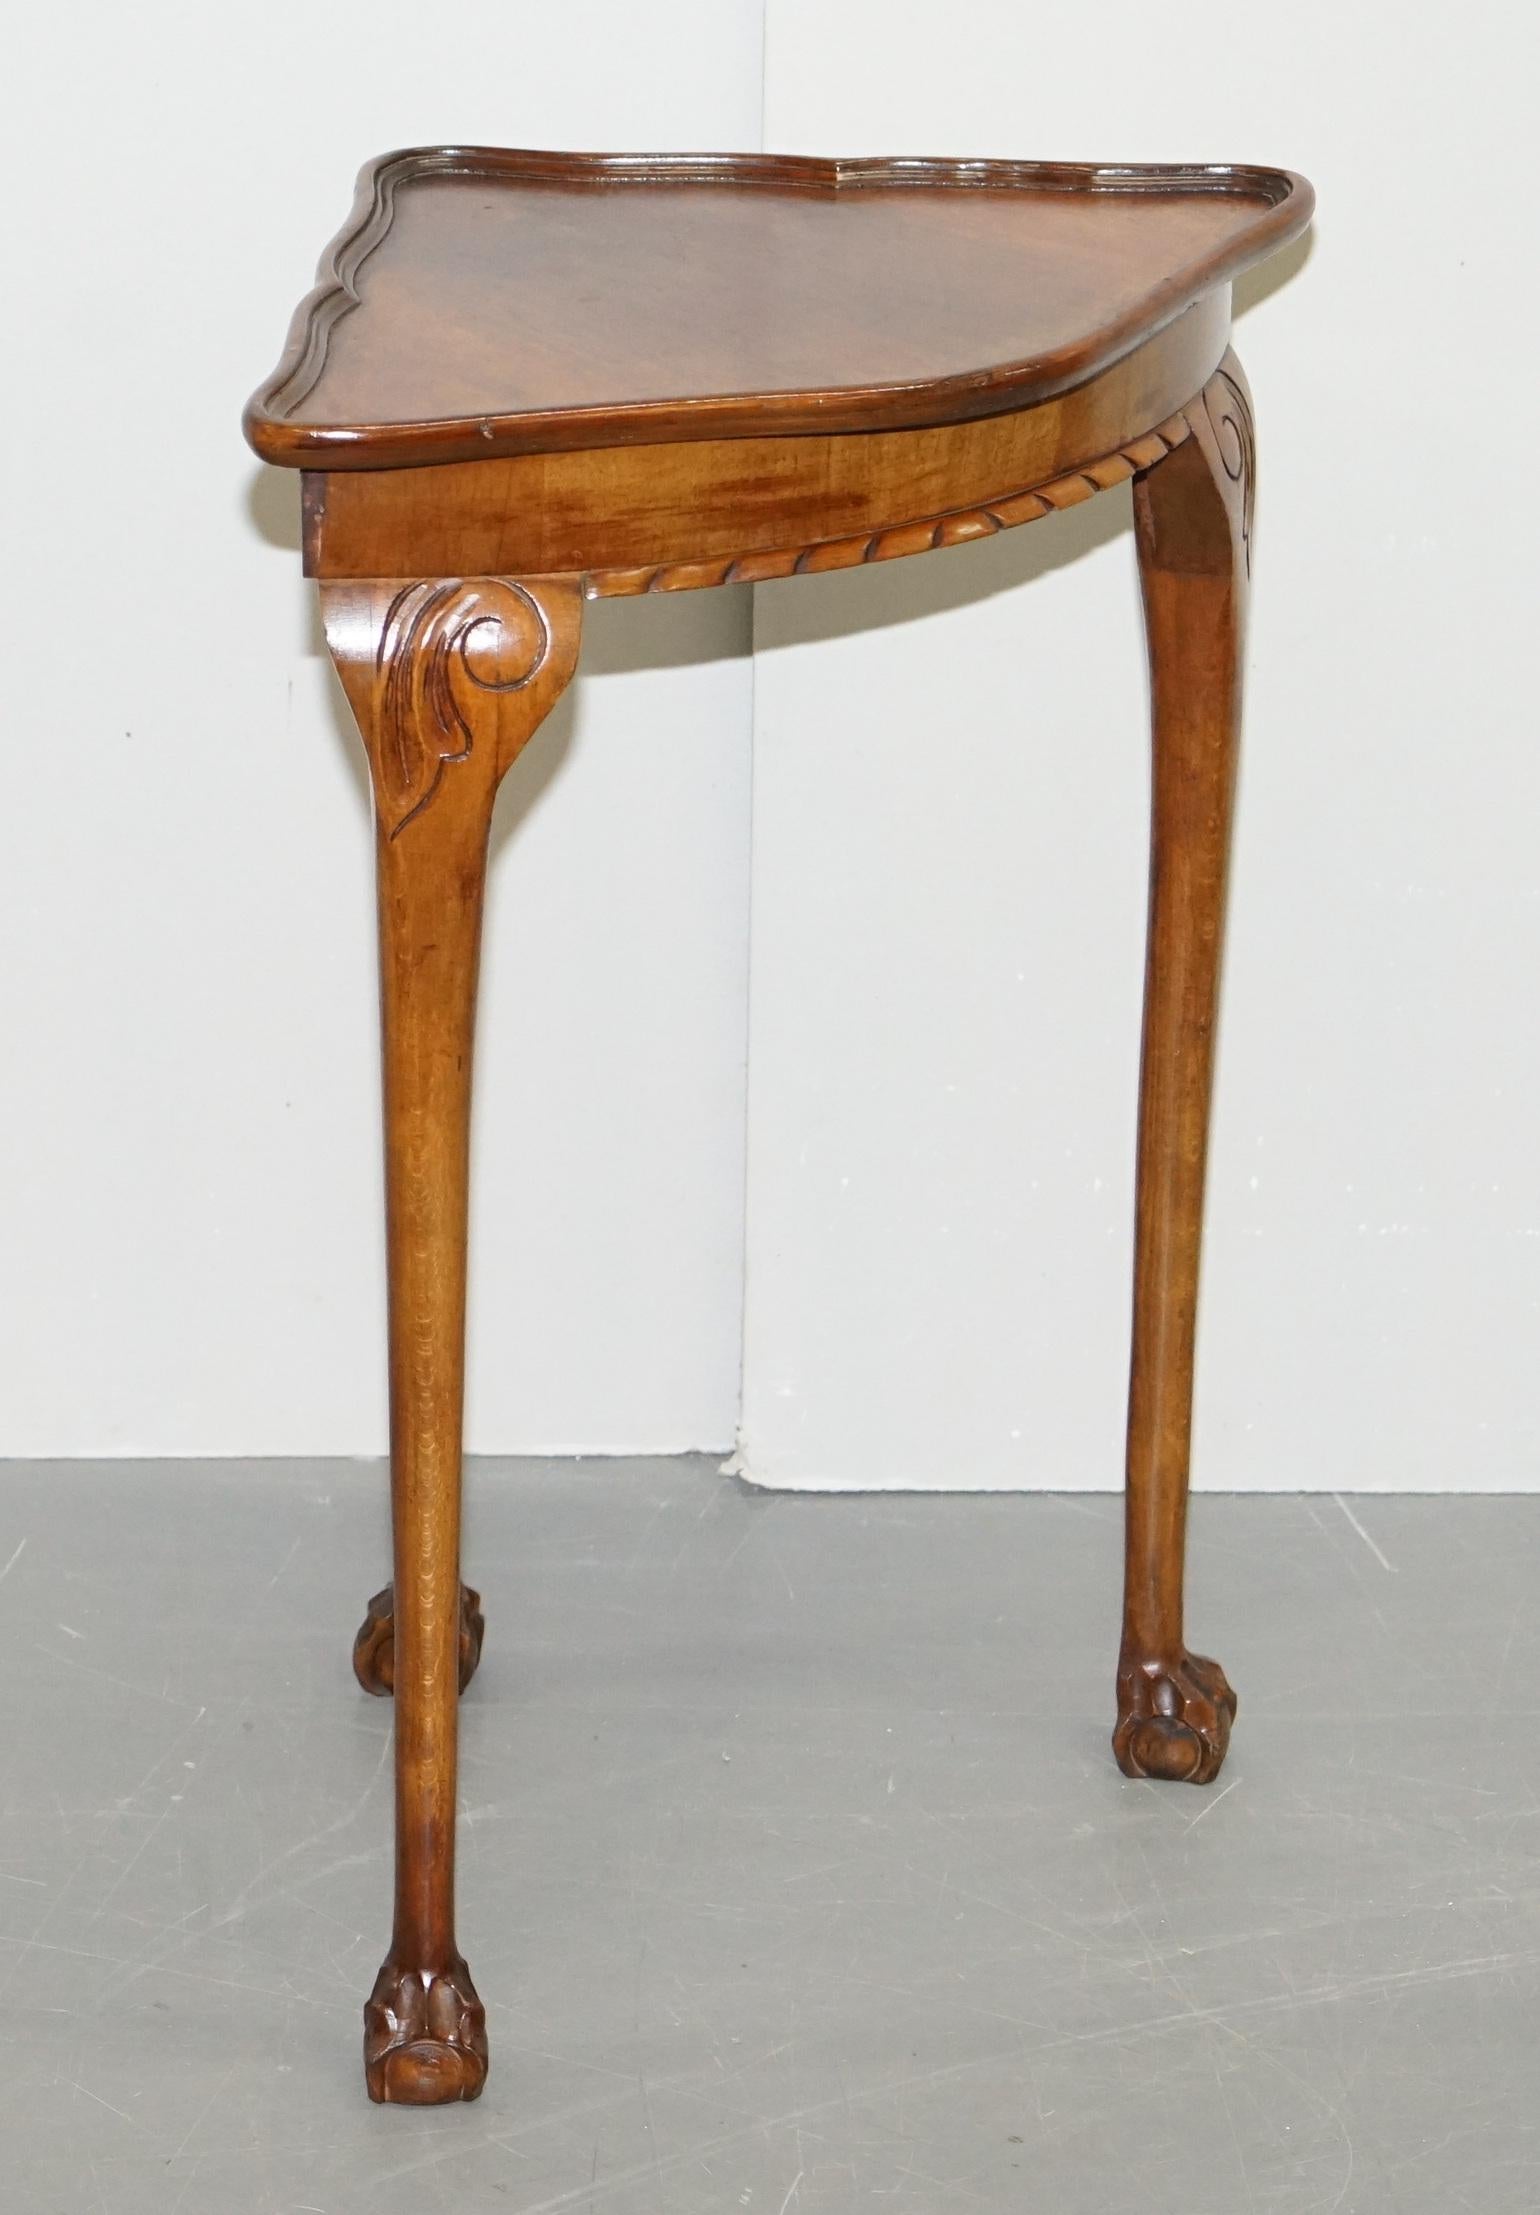 We are delighted to offer for sale this lovely hand circa 1930s Art Deco tall corner side table with ornately carved claw and ball feet

A very good looking, well made and decorative piece, ideally suited as a lamp or plant table

It has a good